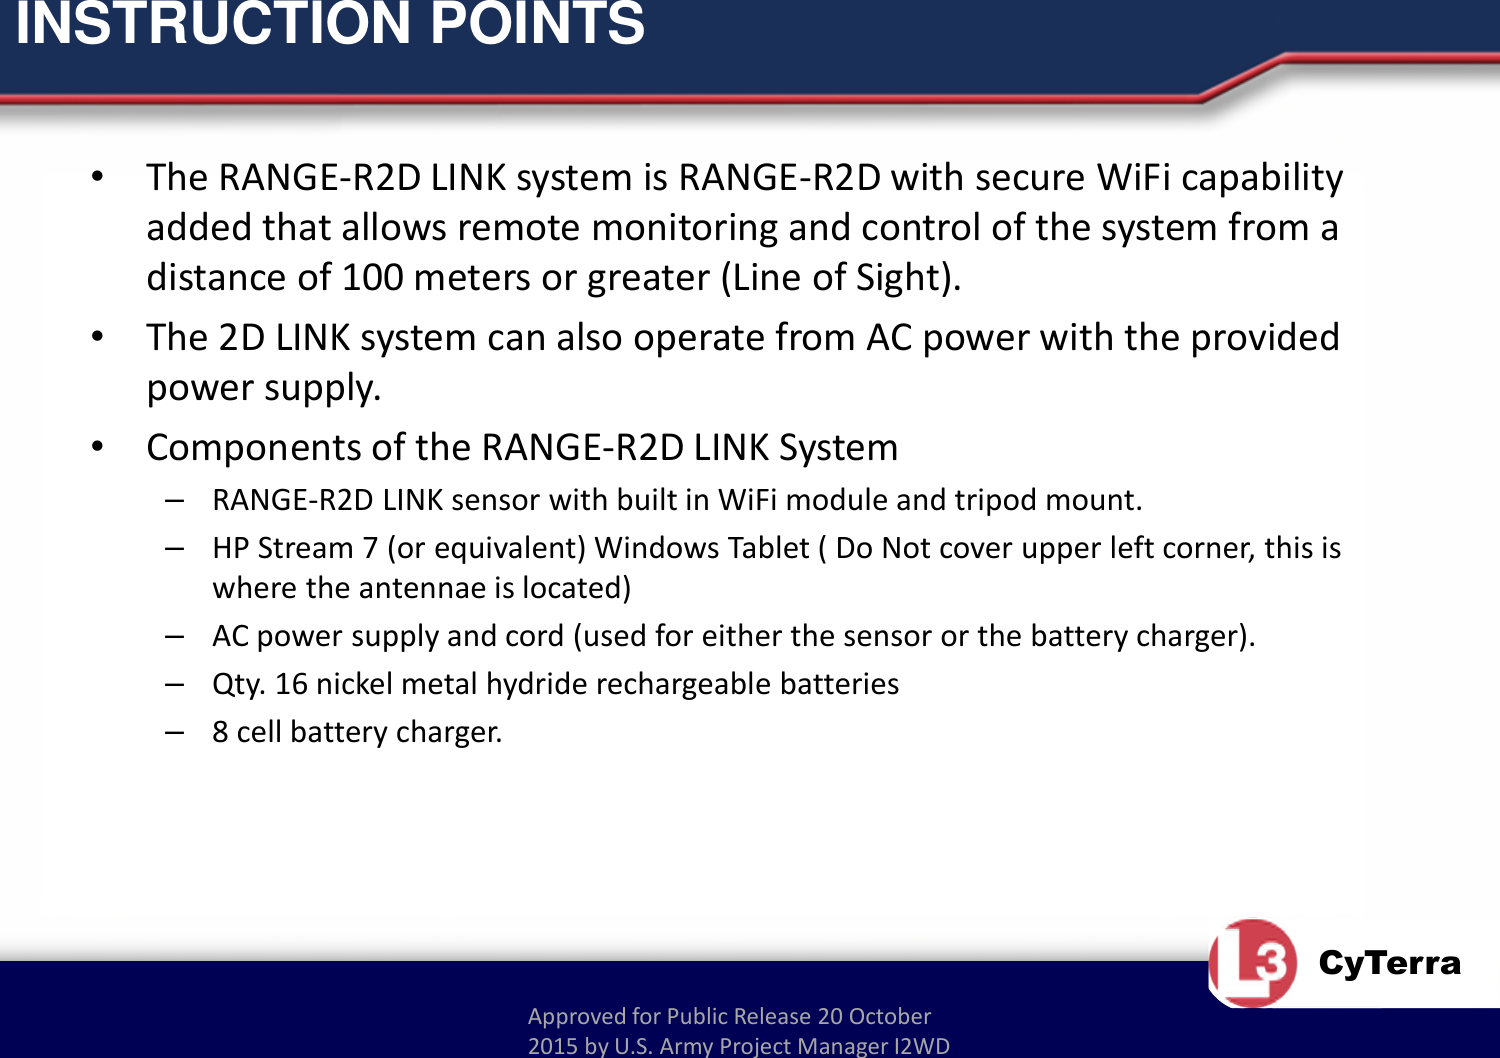 Approved for Public Release 20 October 2015 by U.S. Army Project Manager I2WDCyTerraINSTRUCTION POINTS•The RANGE-R2D LINK system is RANGE-R2D with secure WiFi capability added that allows remote monitoring and control of the system from a distance of 100 meters or greater (Line of Sight).•The 2D LINK system can also operate from AC power with the provided power supply.•Components of the RANGE-R2D LINK System–RANGE-R2D LINK sensor with built in WiFi module and tripod mount.–HP Stream 7 (or equivalent) Windows Tablet ( Do Not cover upper left corner, this is where the antennae is located)–AC power supply and cord (used for either the sensor or the battery charger).–Qty. 16 nickel metal hydride rechargeable batteries–8 cell battery charger.